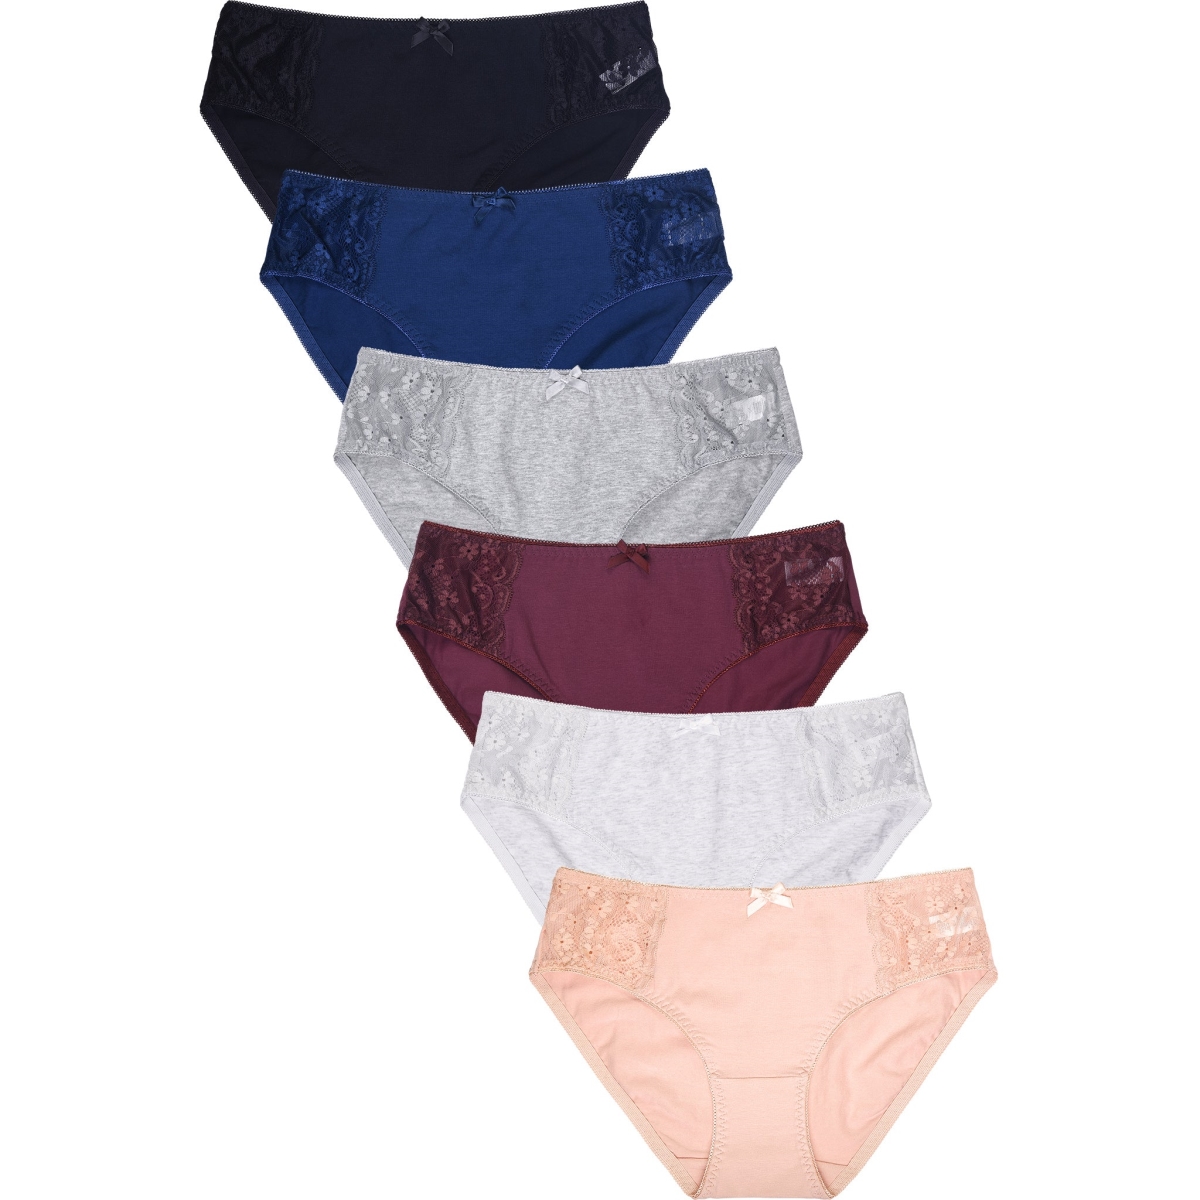 Picture of 247 Frenzy 247-LP1426CK-MD Sofra Womens Essentials Cotton Stretch Bikini Panty Underwear - Assorted Color - Medium - Pack of 6